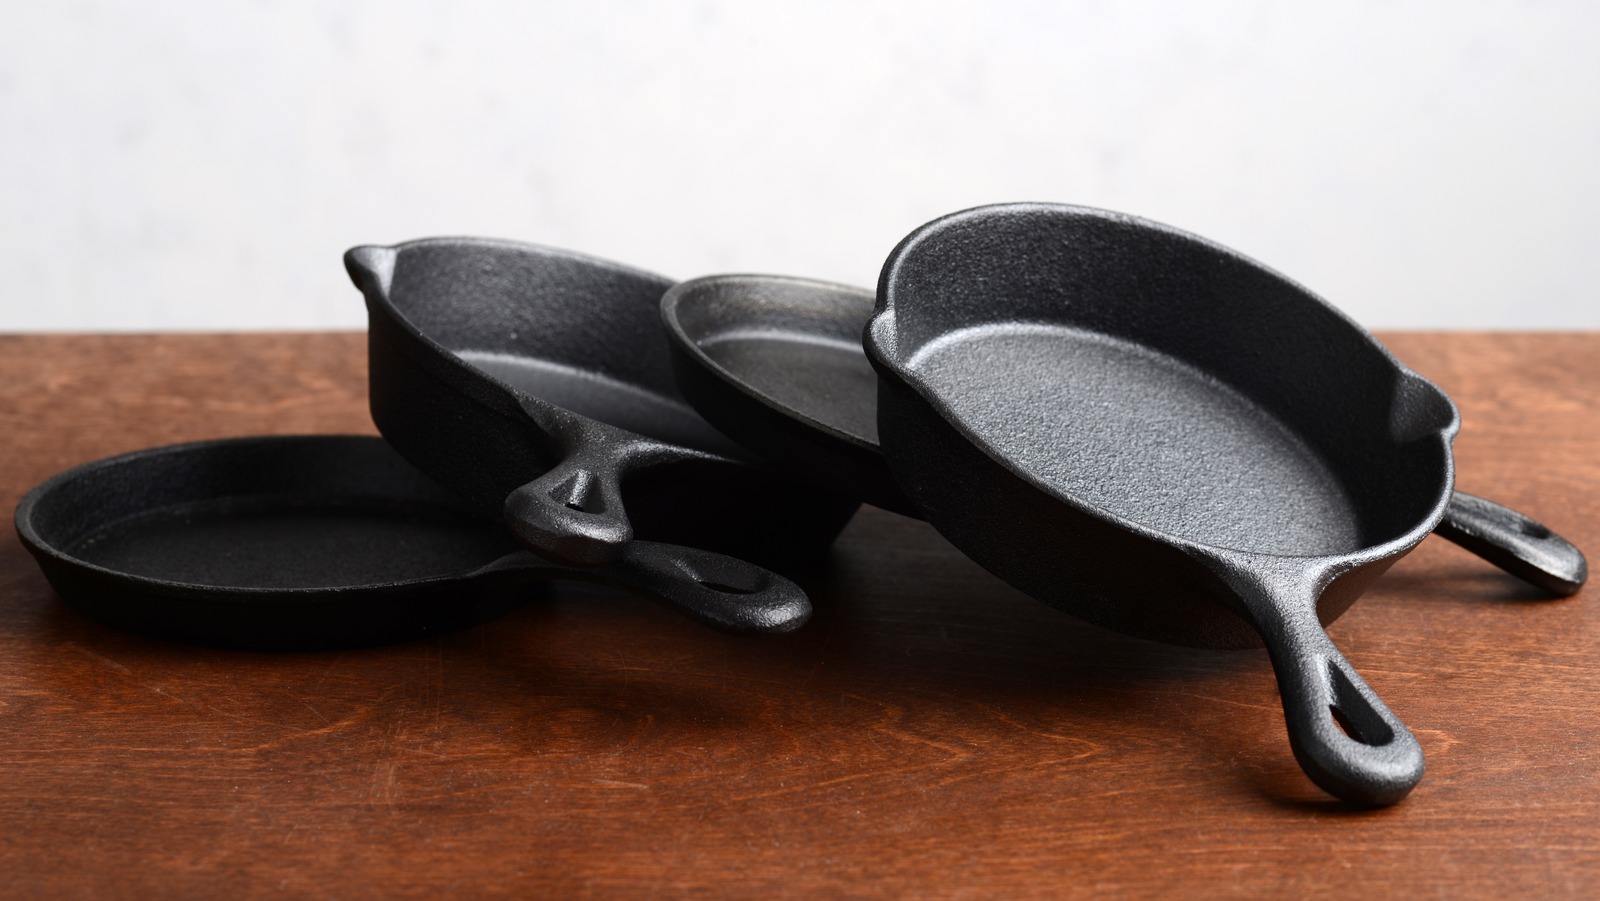 https://www.thedailymeal.com/img/gallery/common-myths-about-cast-iron-skillets-you-need-to-know/l-intro-1692392834.jpg